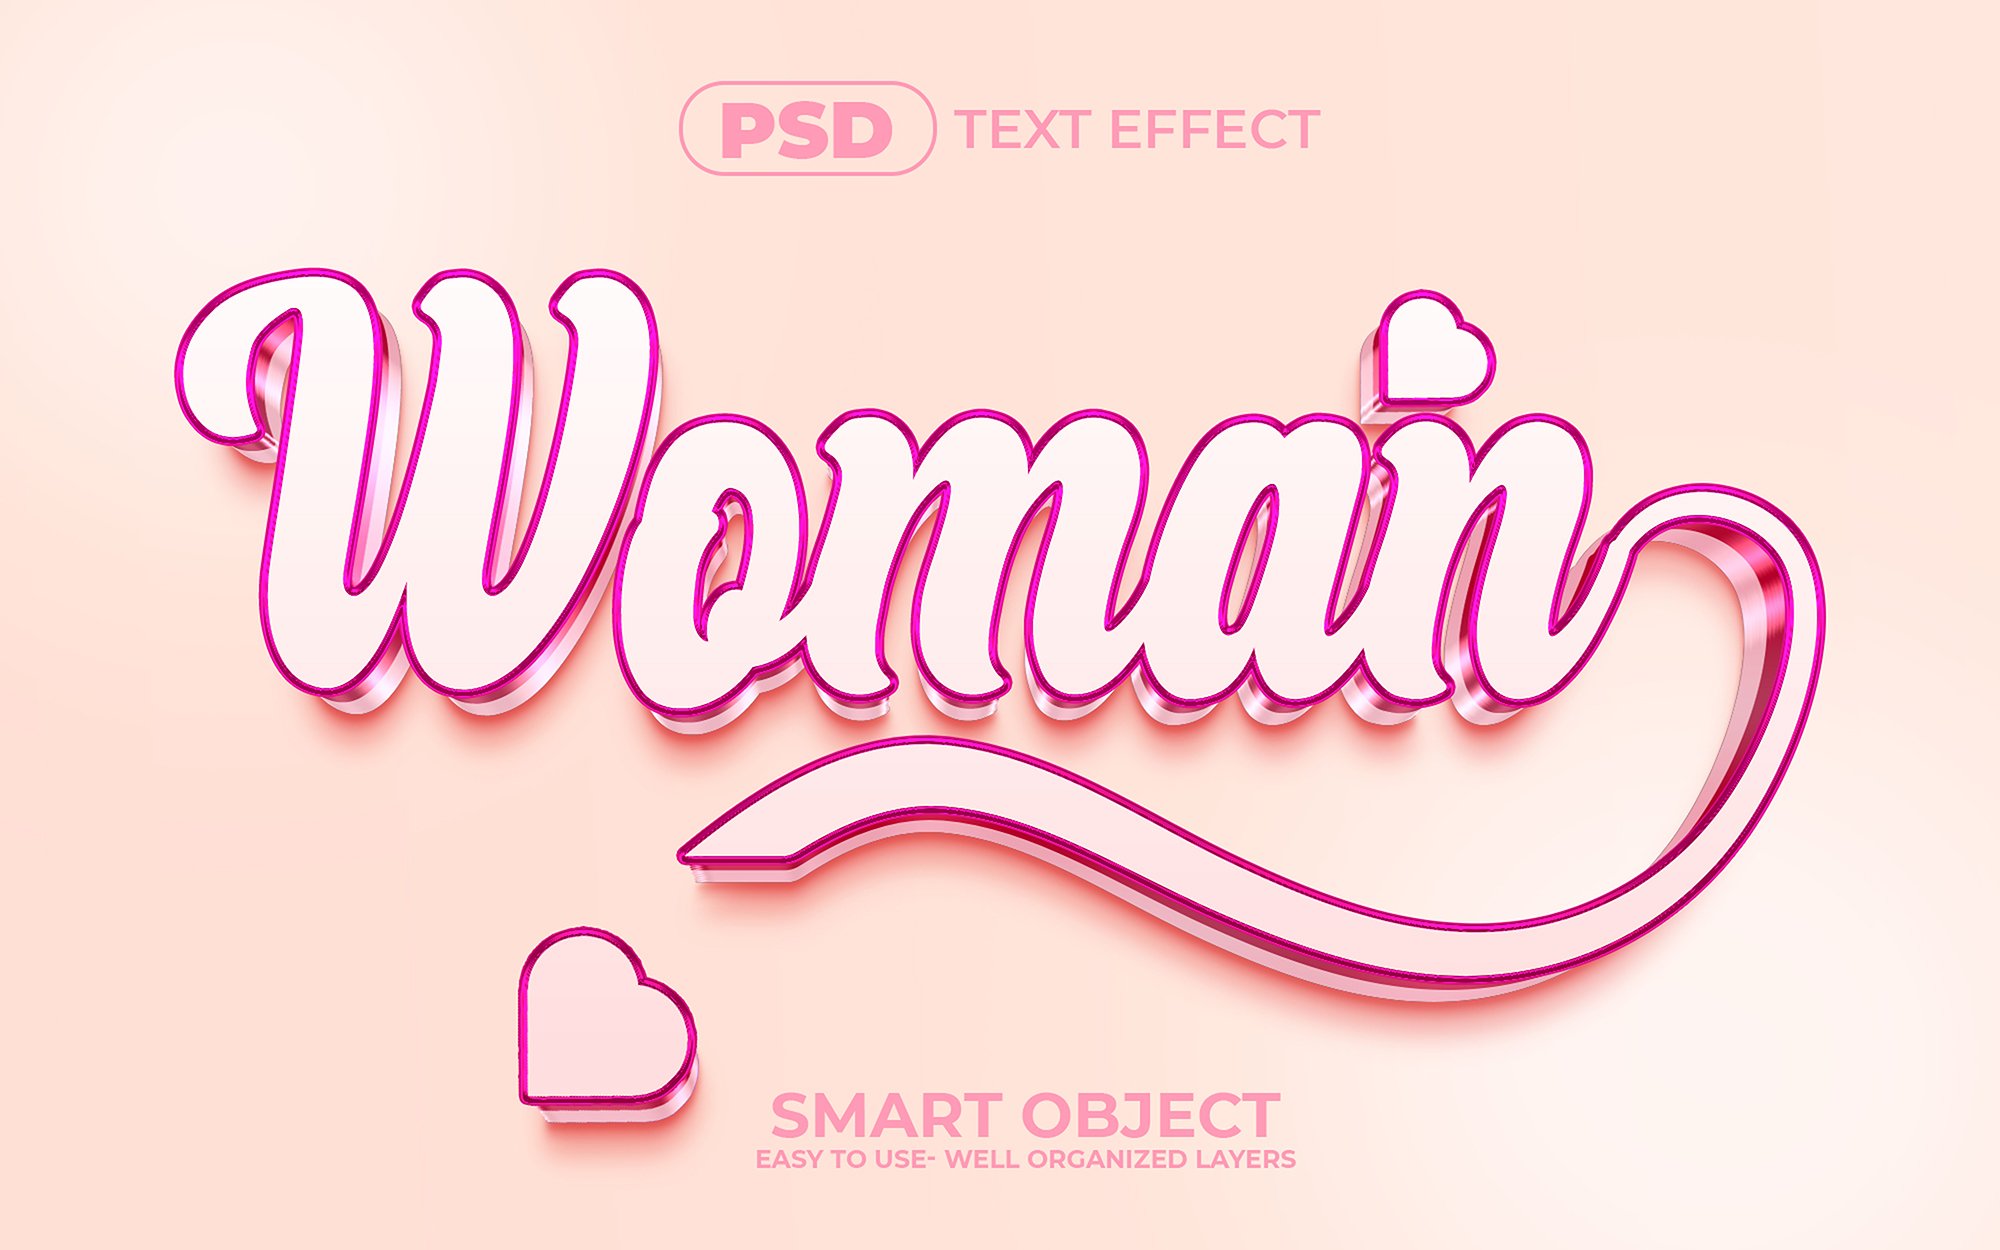 Woman 3d Editable Text Effect Stylecover image.